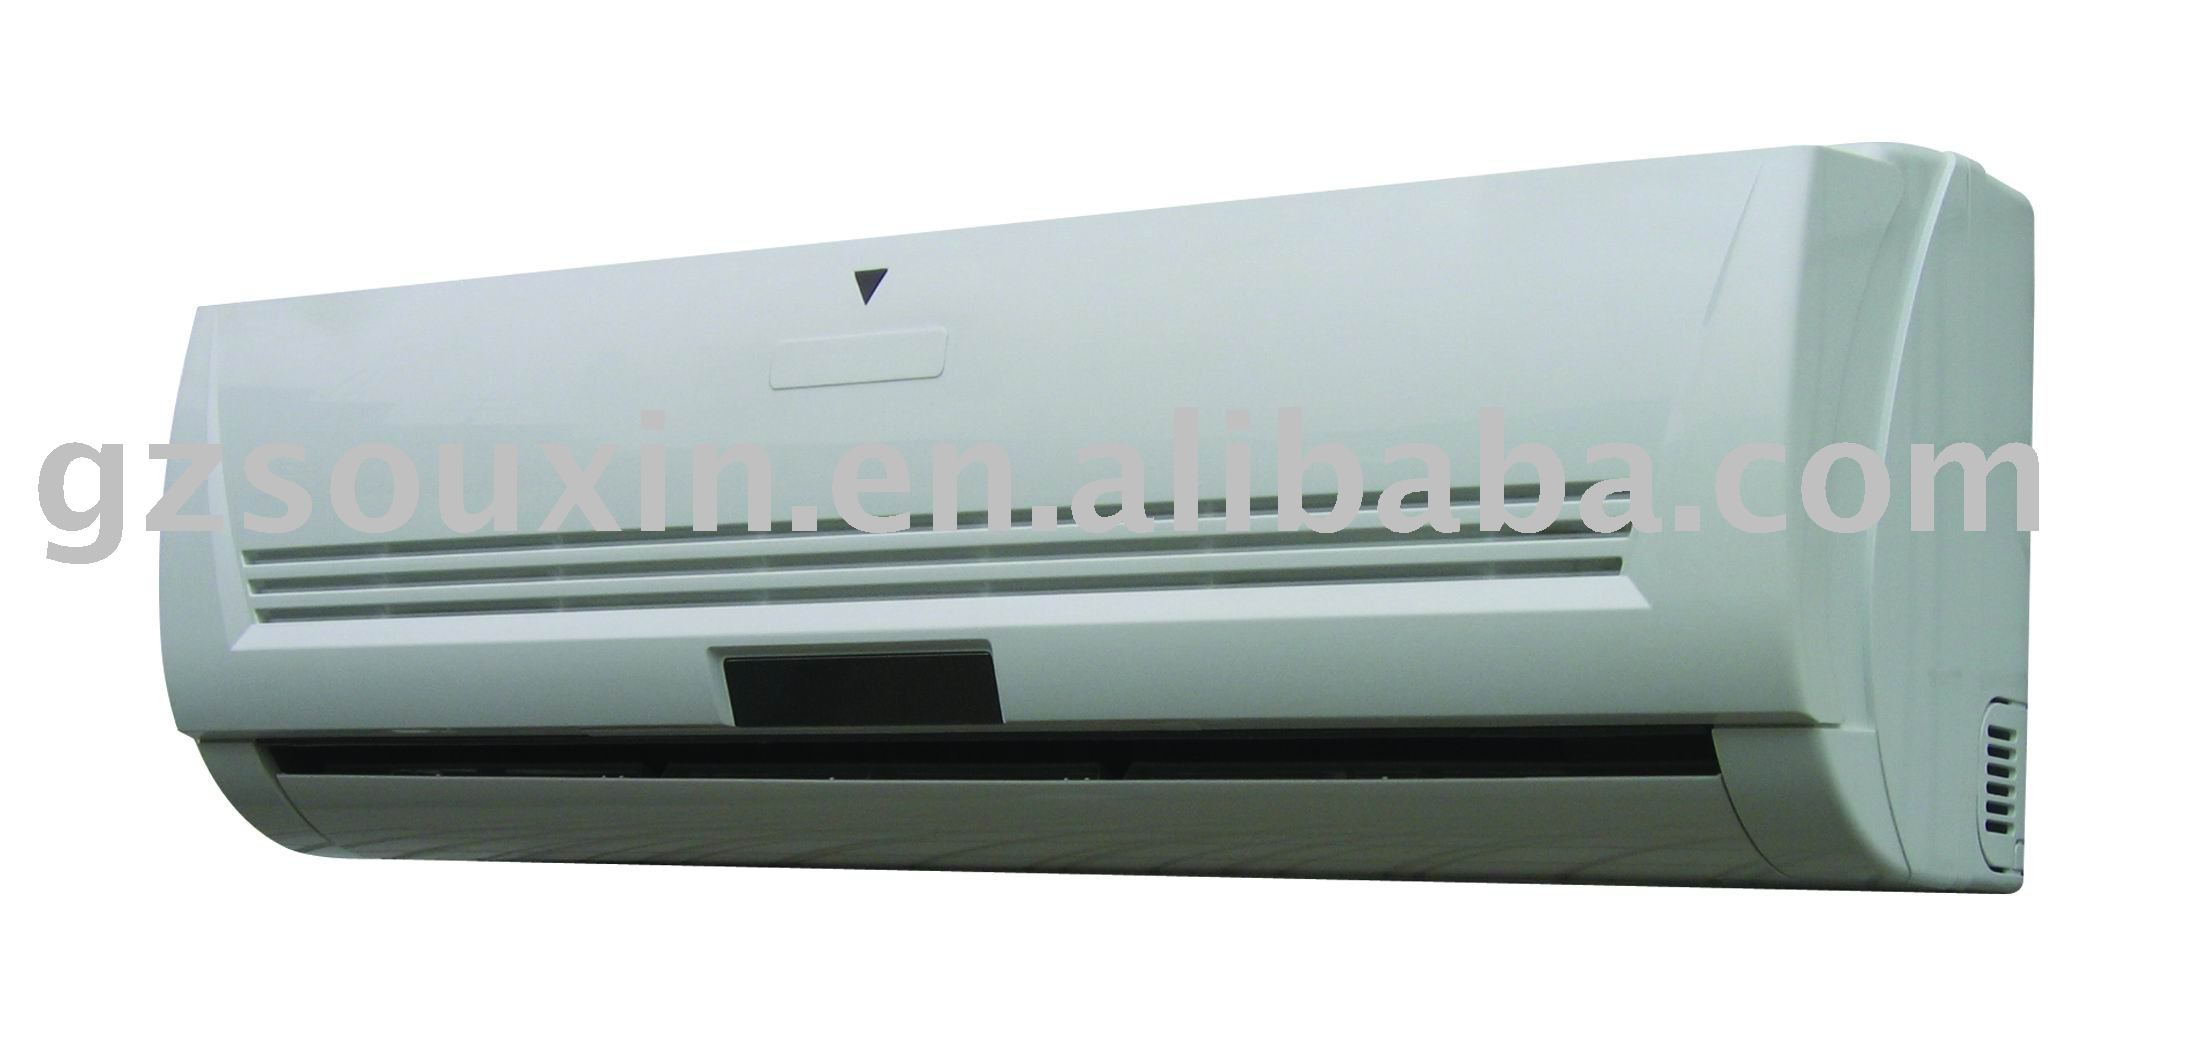 AIR CONDITIONER REMOTE CONTROL CARRIER - AIR CONDITIONERS